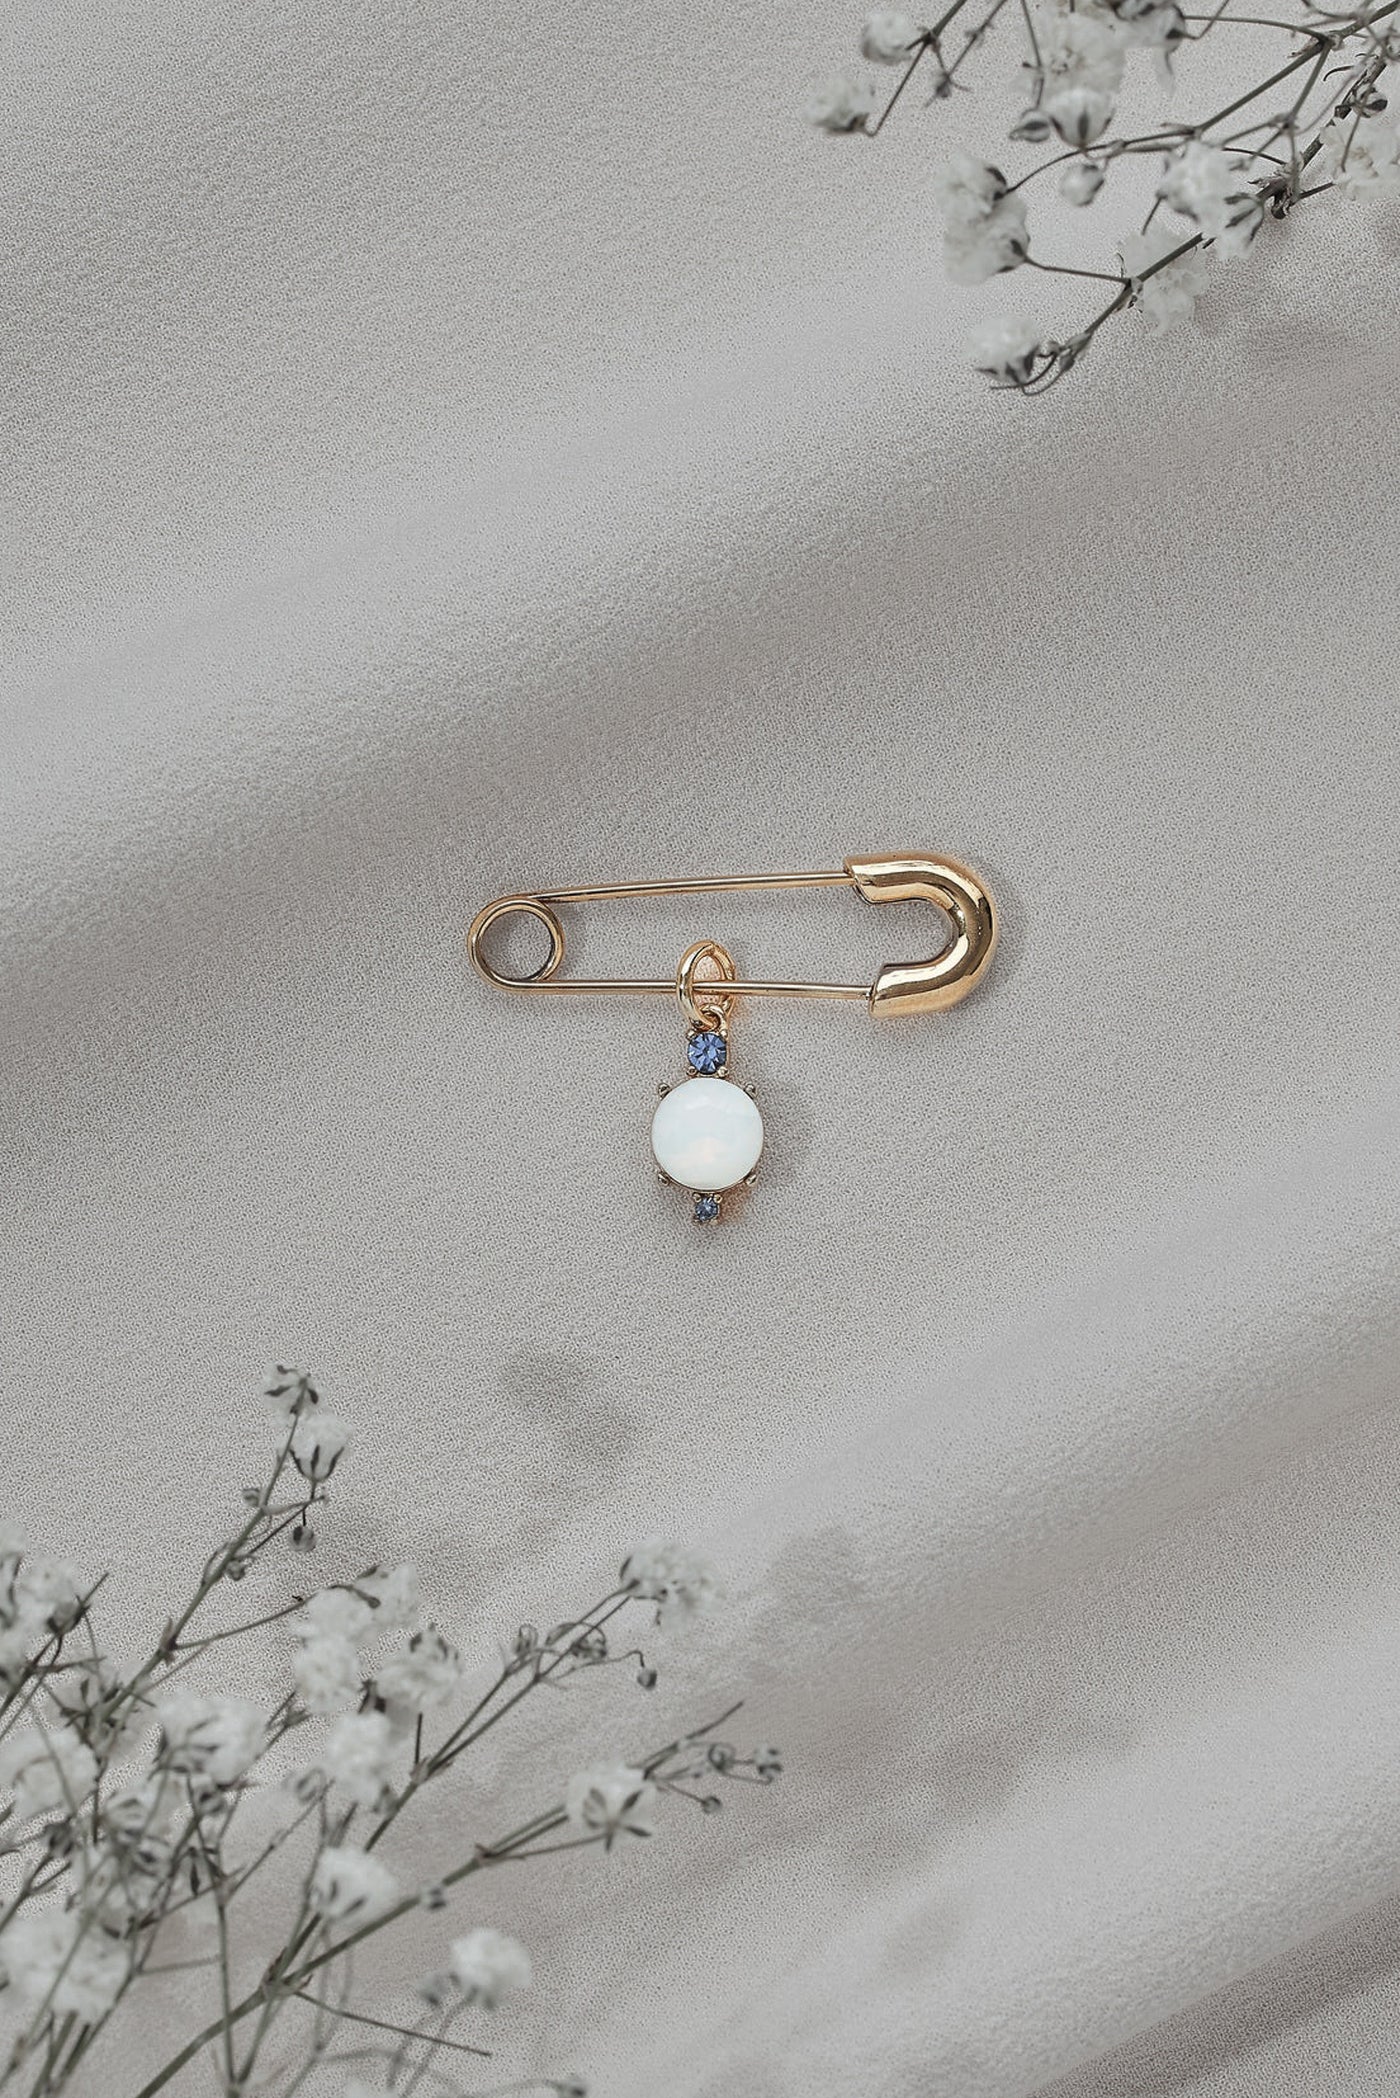 A basic shot of a "something blue" pin featuring gold details and a round white gem.